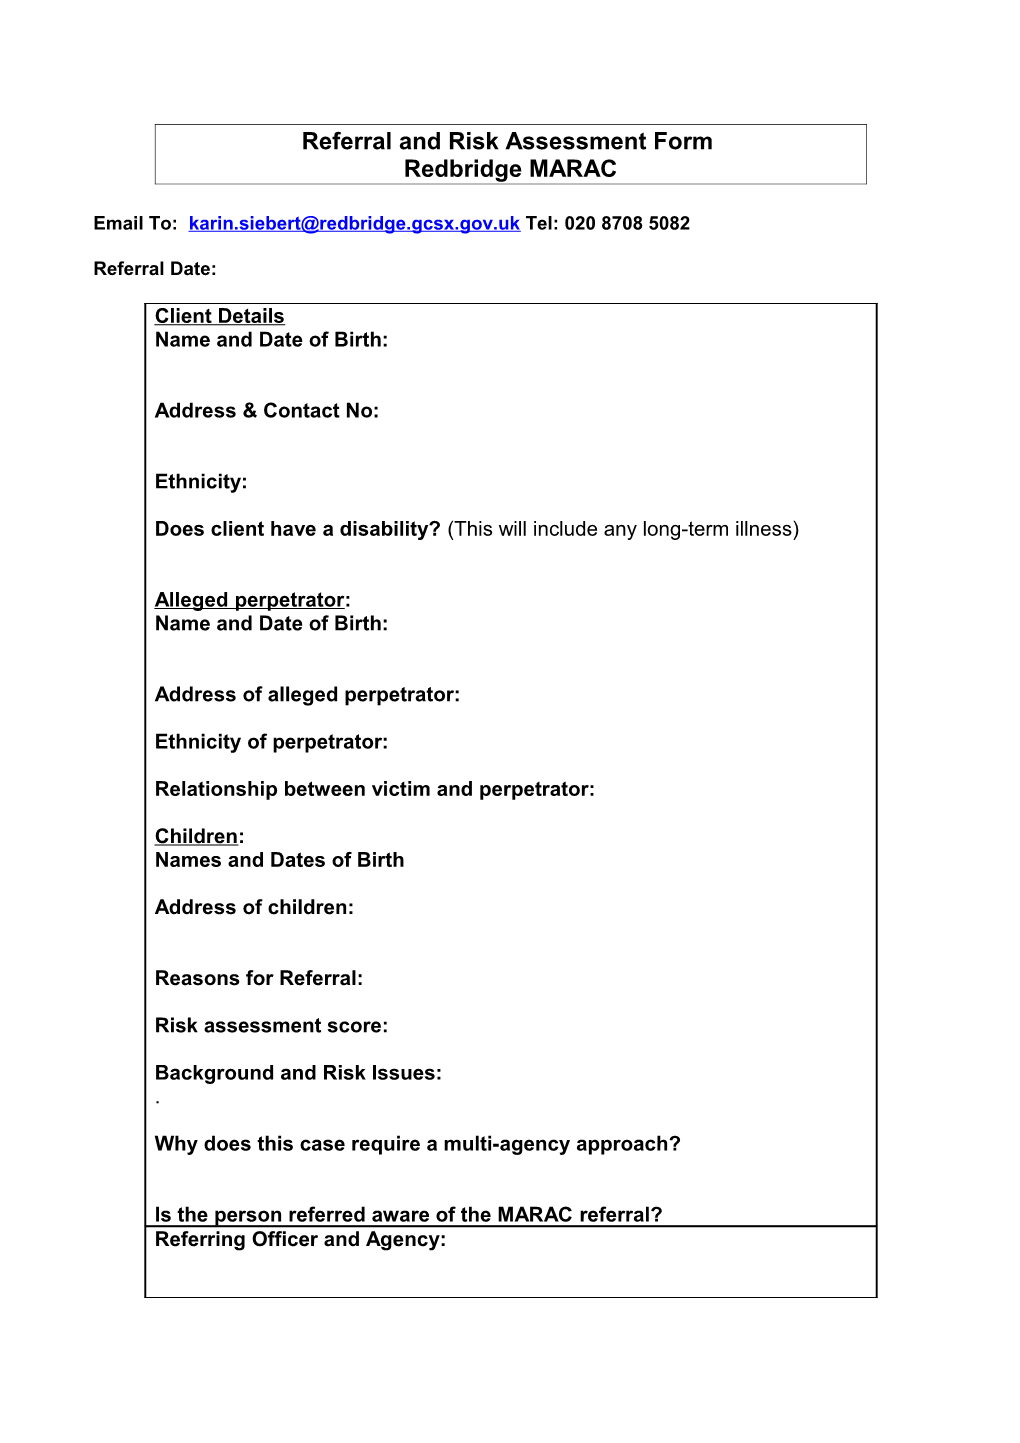 Referral and Risk Assessment Form